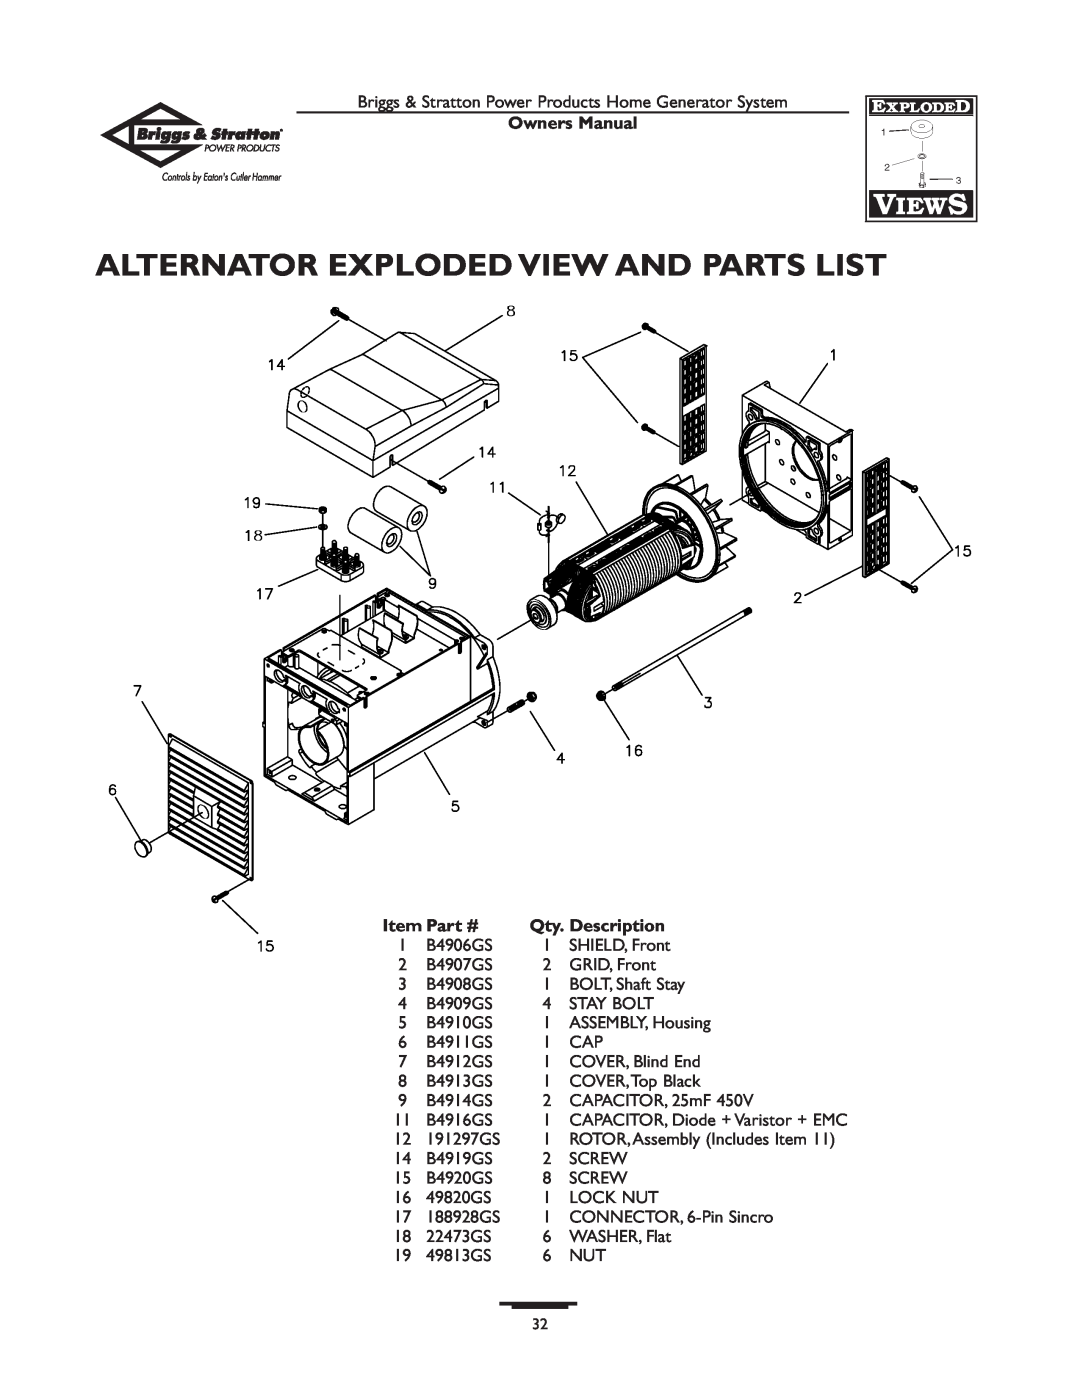 Briggs & Stratton 190839GS owner manual Alternator Exploded View And Parts List, Owners Manual, Qty. Description 